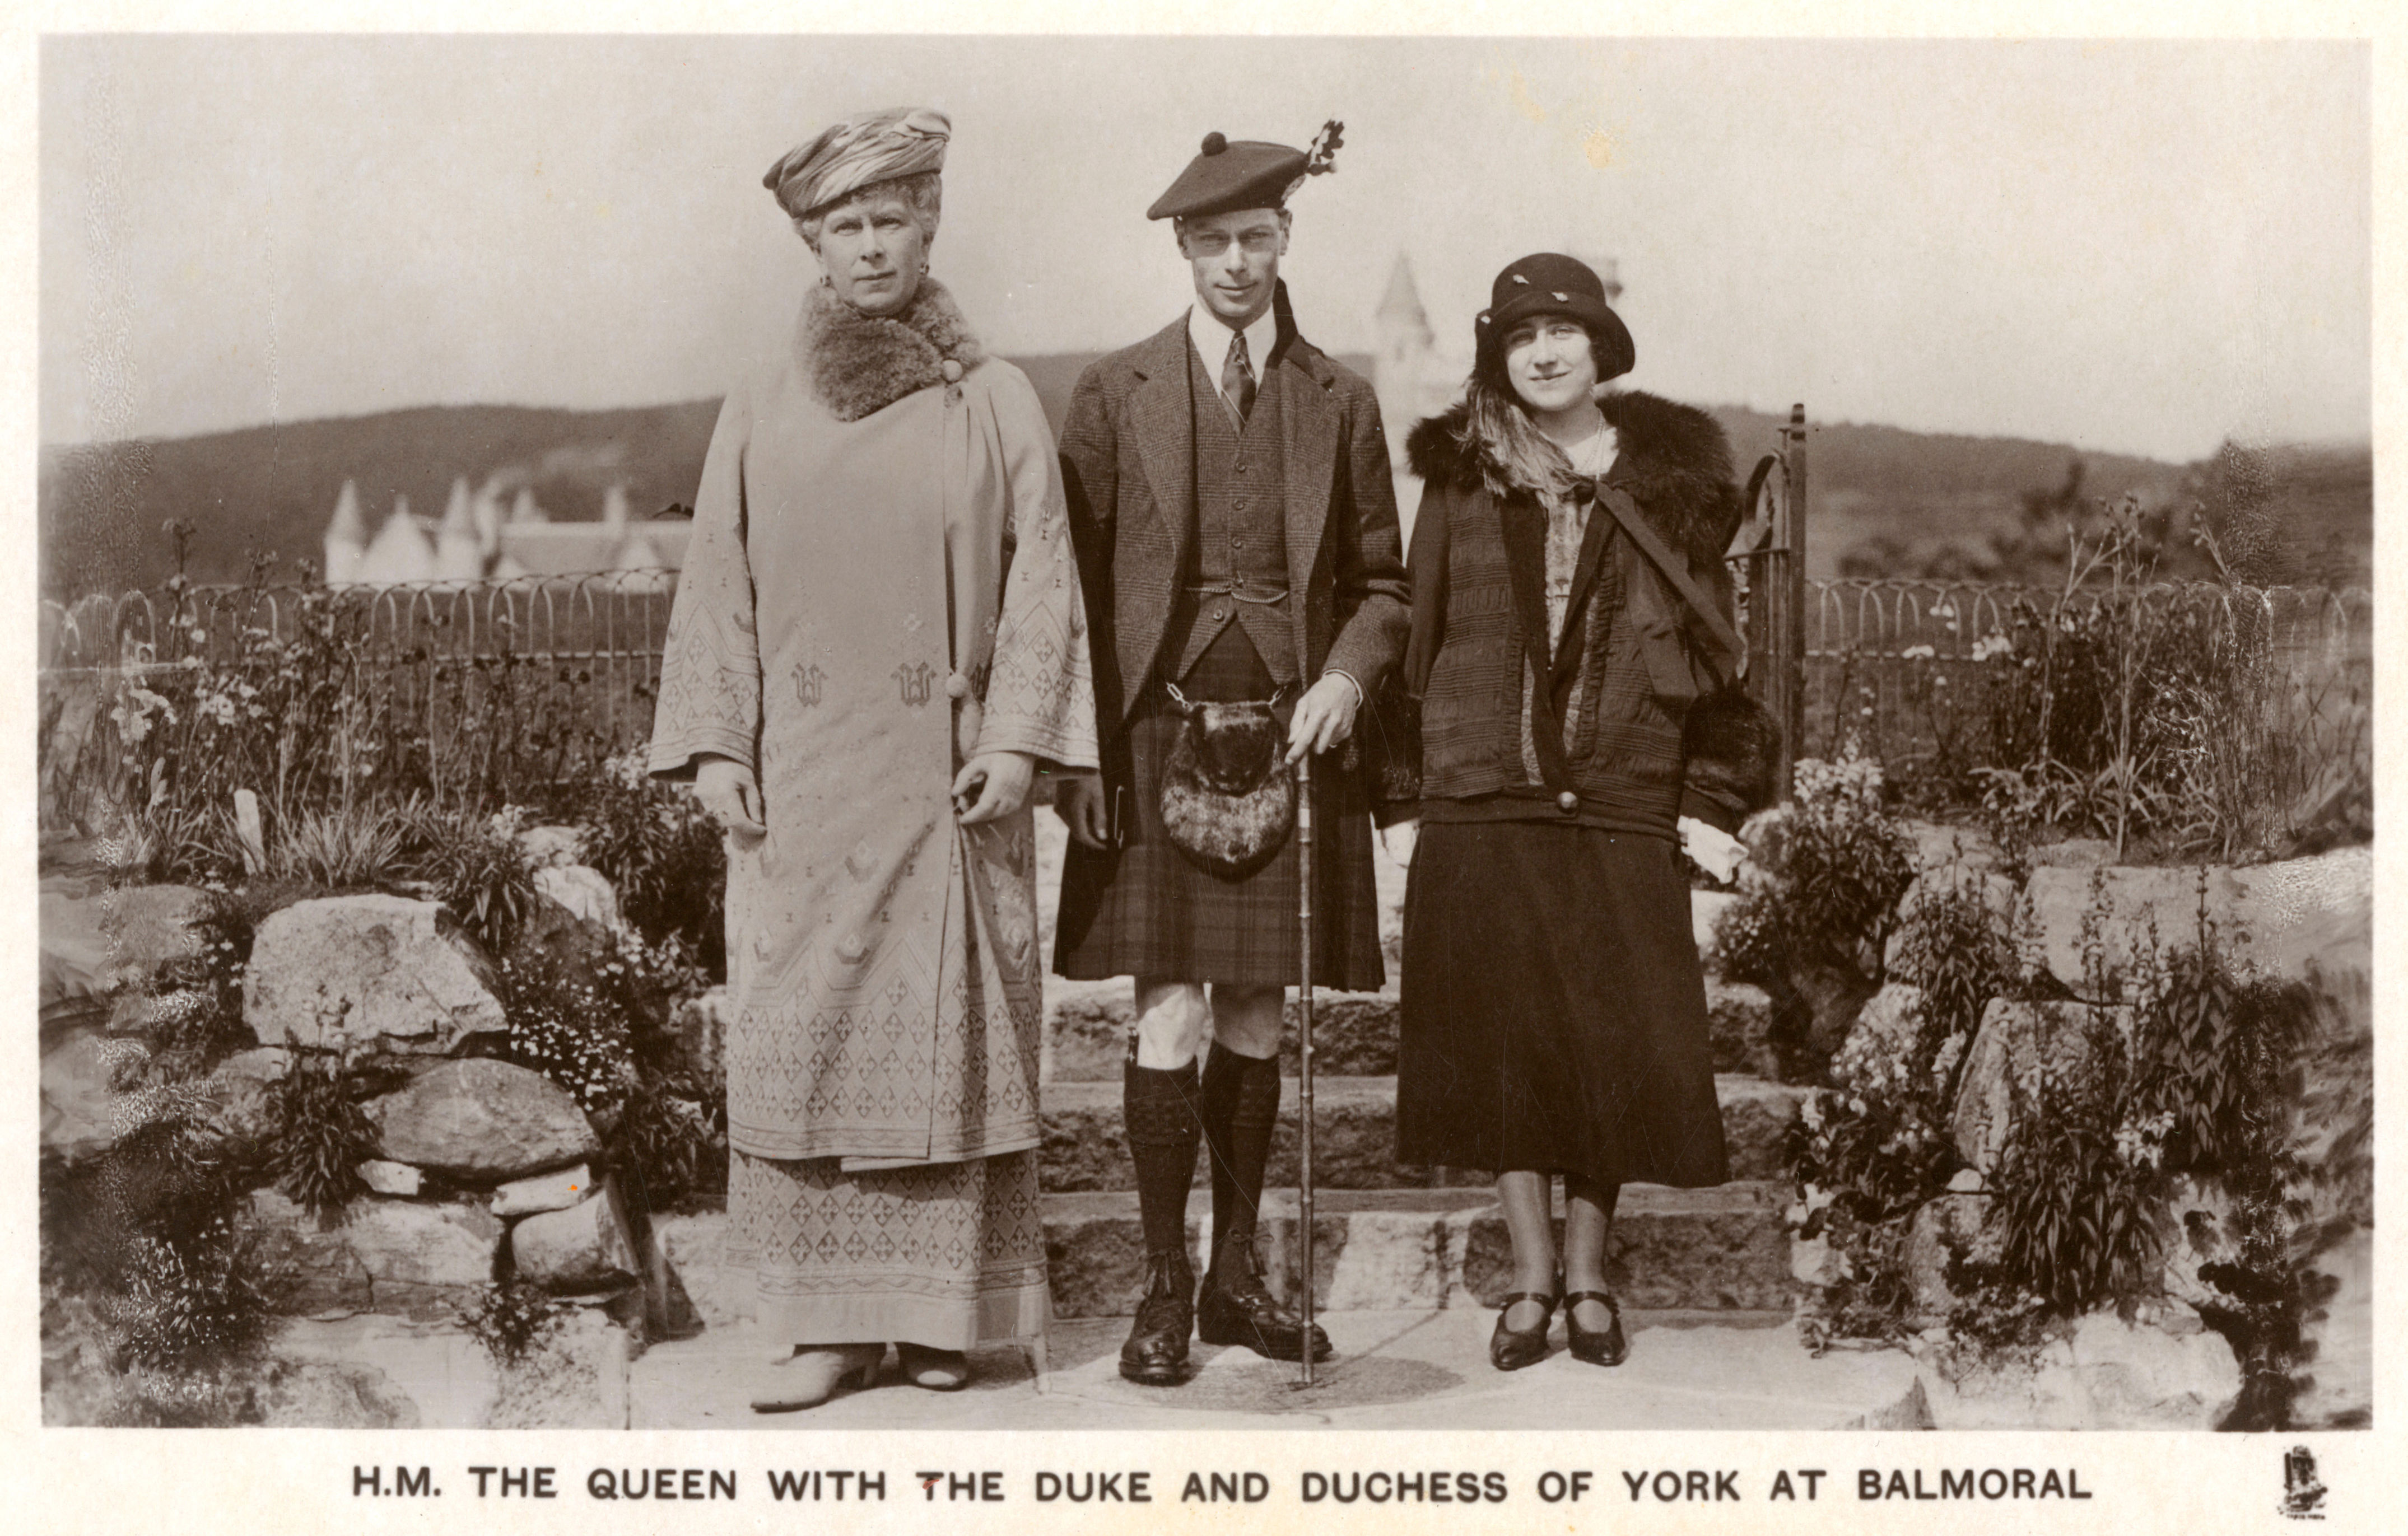 <p>Queen consort Mary of Teck posed with son Albert, Duke of York (later King George VI) and his wife, Elizabeth, Duchess of York (later Queen Elizabeth the Queen Mother) on the grounds of Balmoral in Scotland during their annual autumn visit at some time during the 1930s.</p>